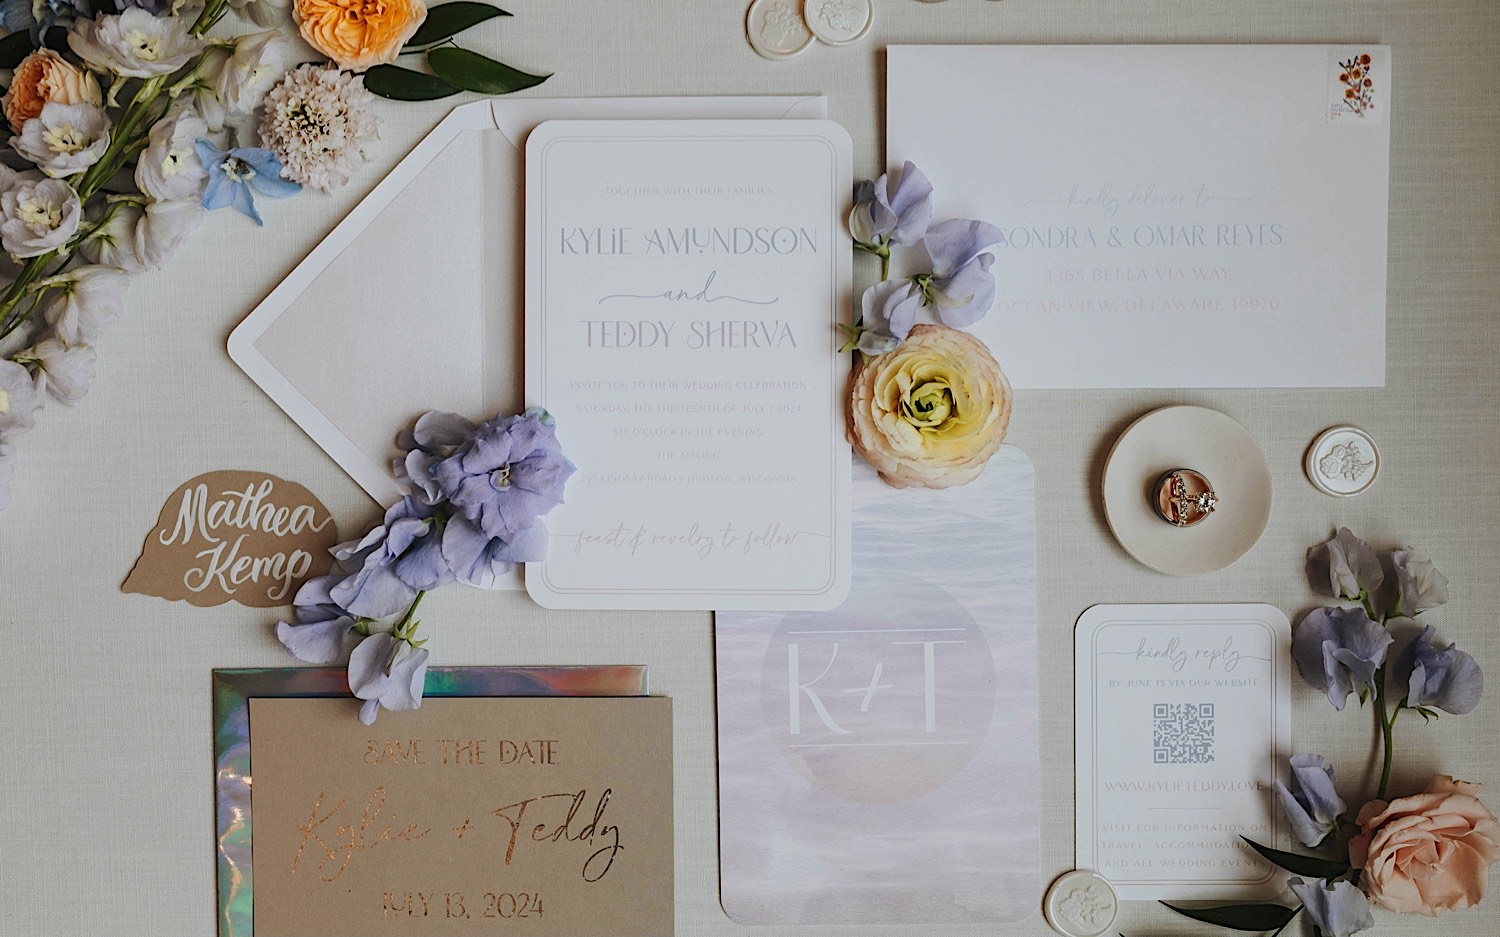 A wedding day flatlay consisting of flowers, wedding invites, and other decorations.